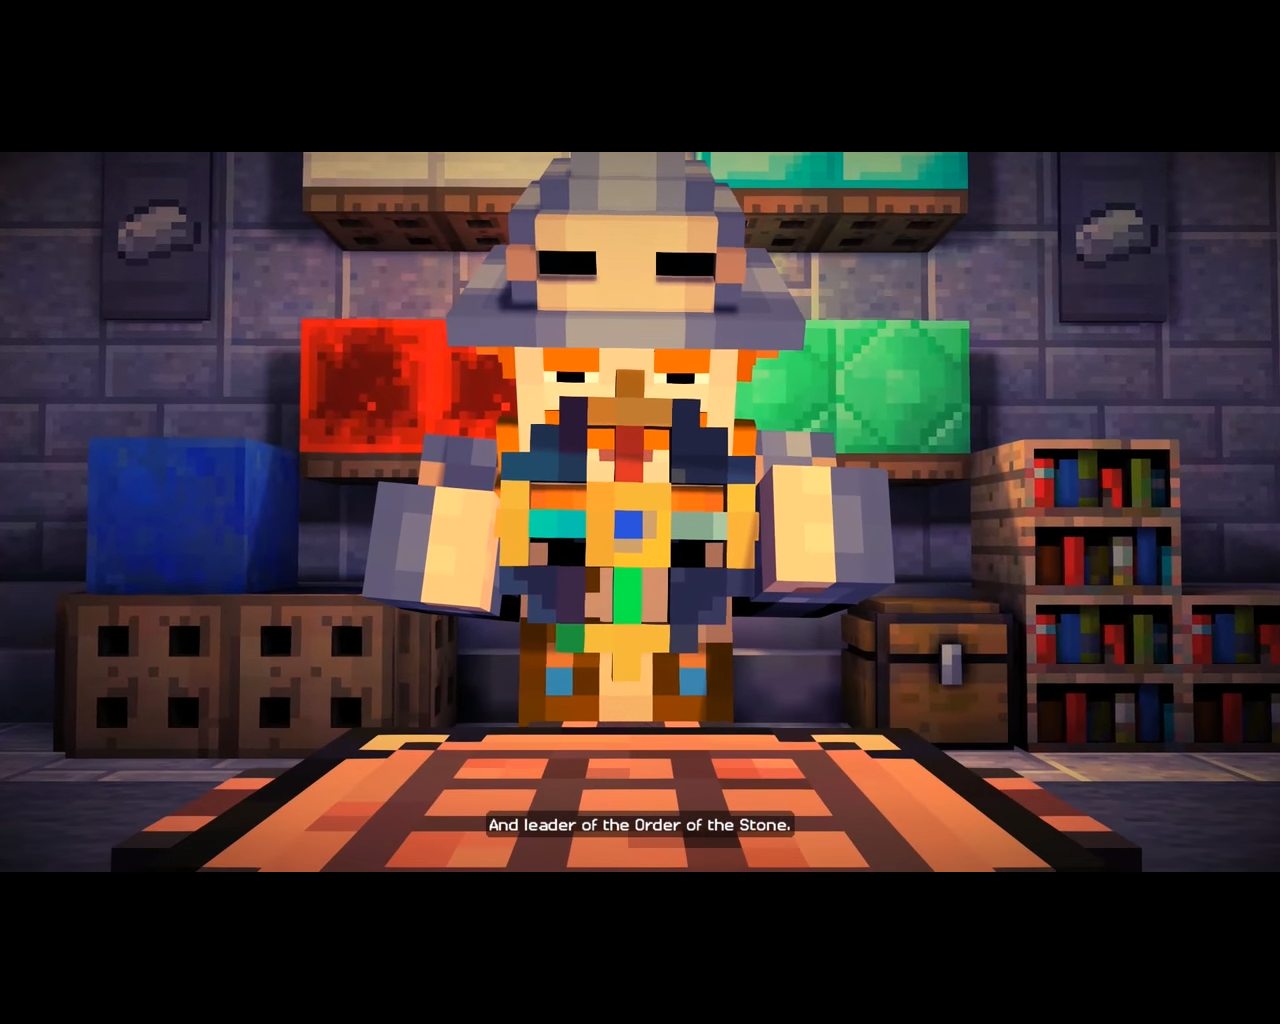 Minecraft STORY MODE MOD  WITHER STORM, JESSIE, SKY DIMENSION, & MORE!! 